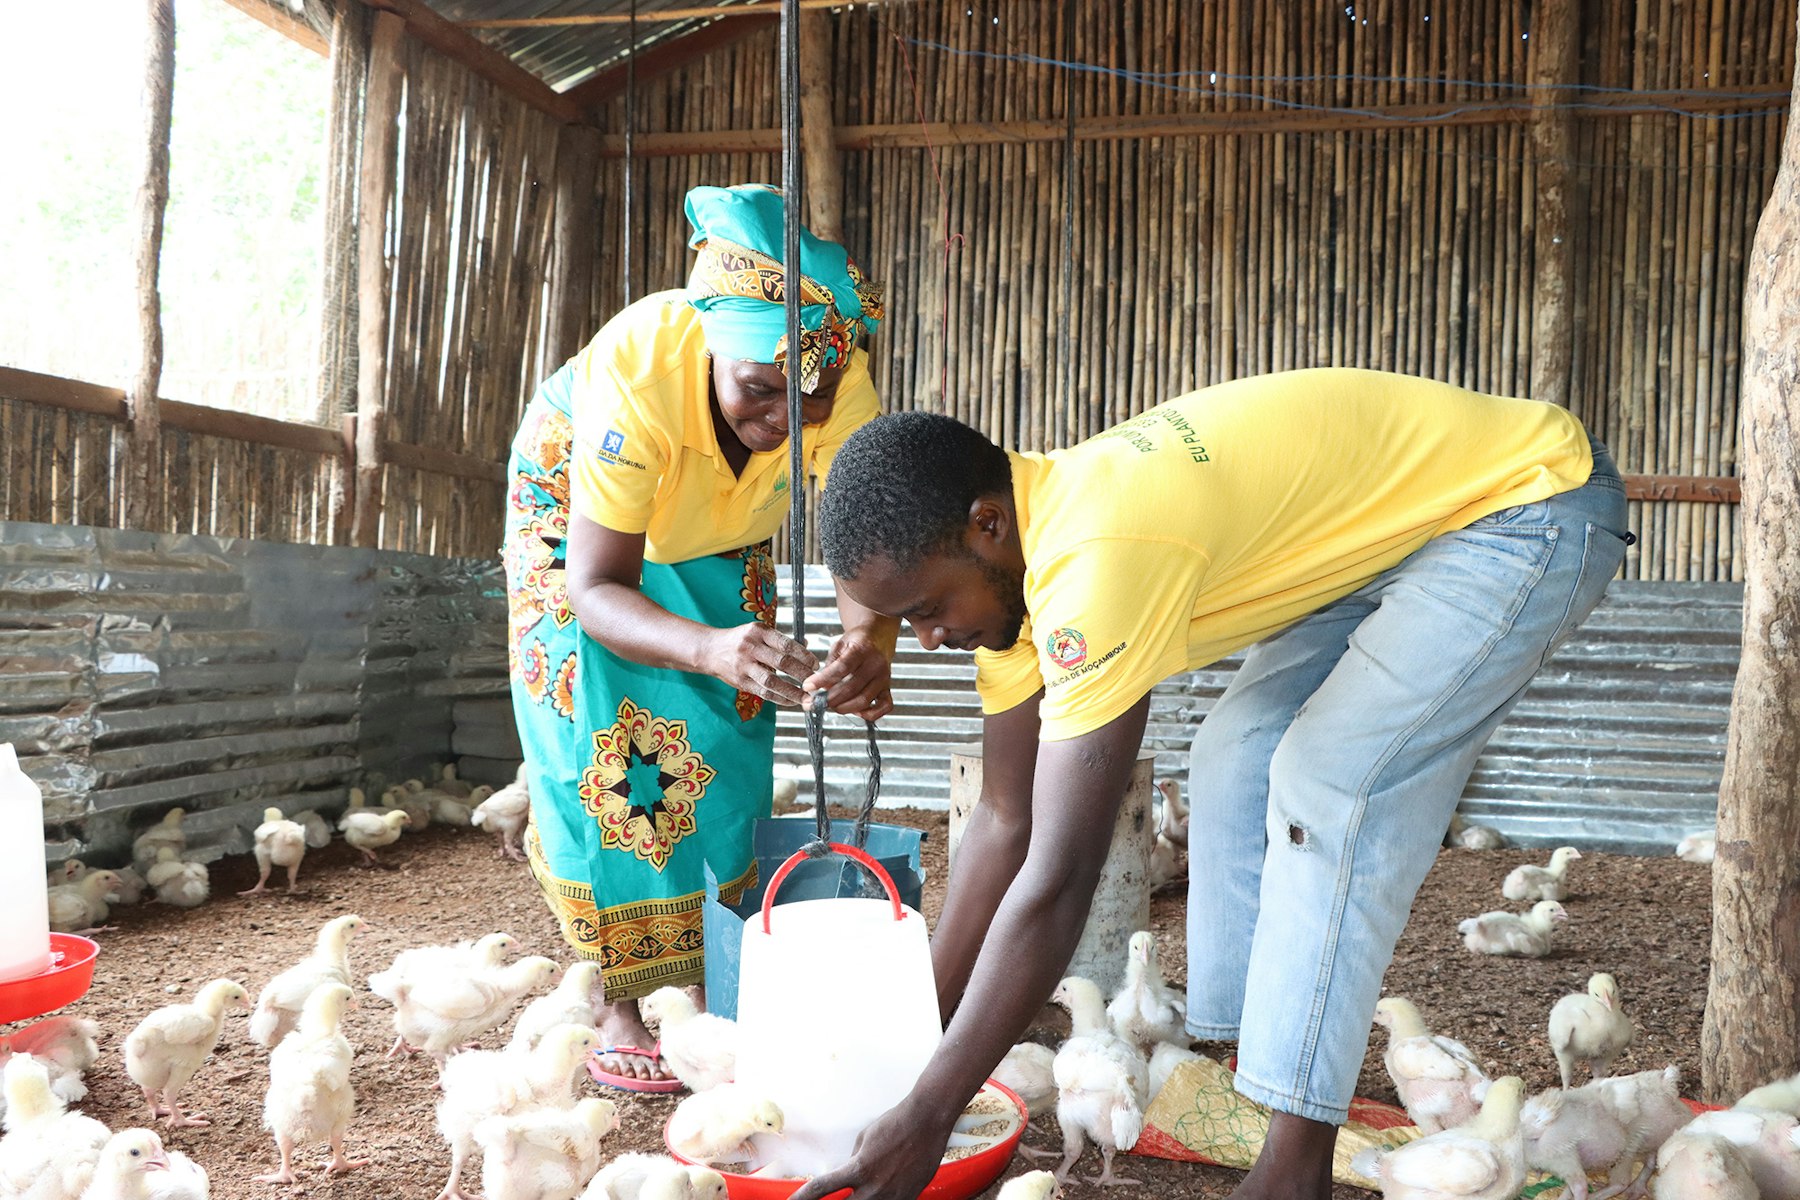 Poultry associations are helping internally displaced people to identify new sources of food and income, and bounce back from the shocks of recent years. | AKDN / Safira Chirindza